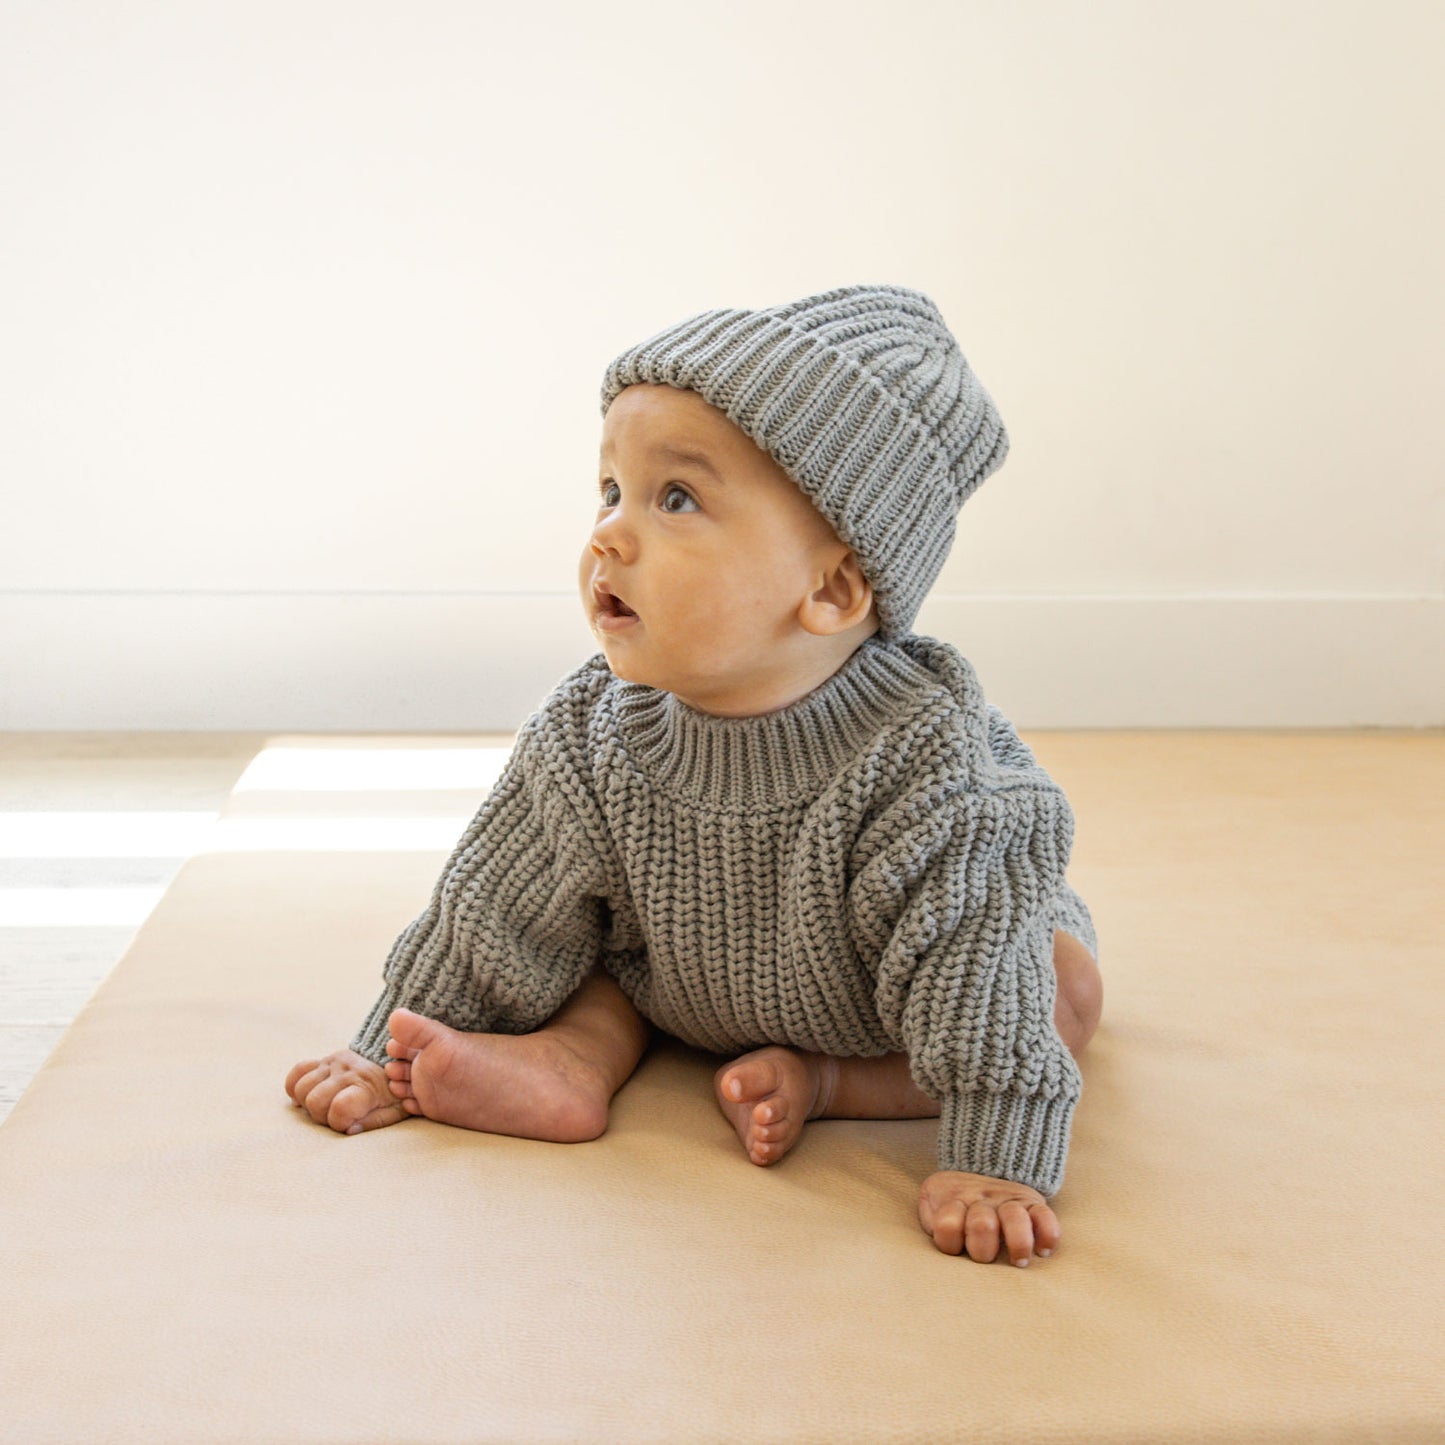 Baby wearing Quincy Mae Chunky Knit Sweater - Basil